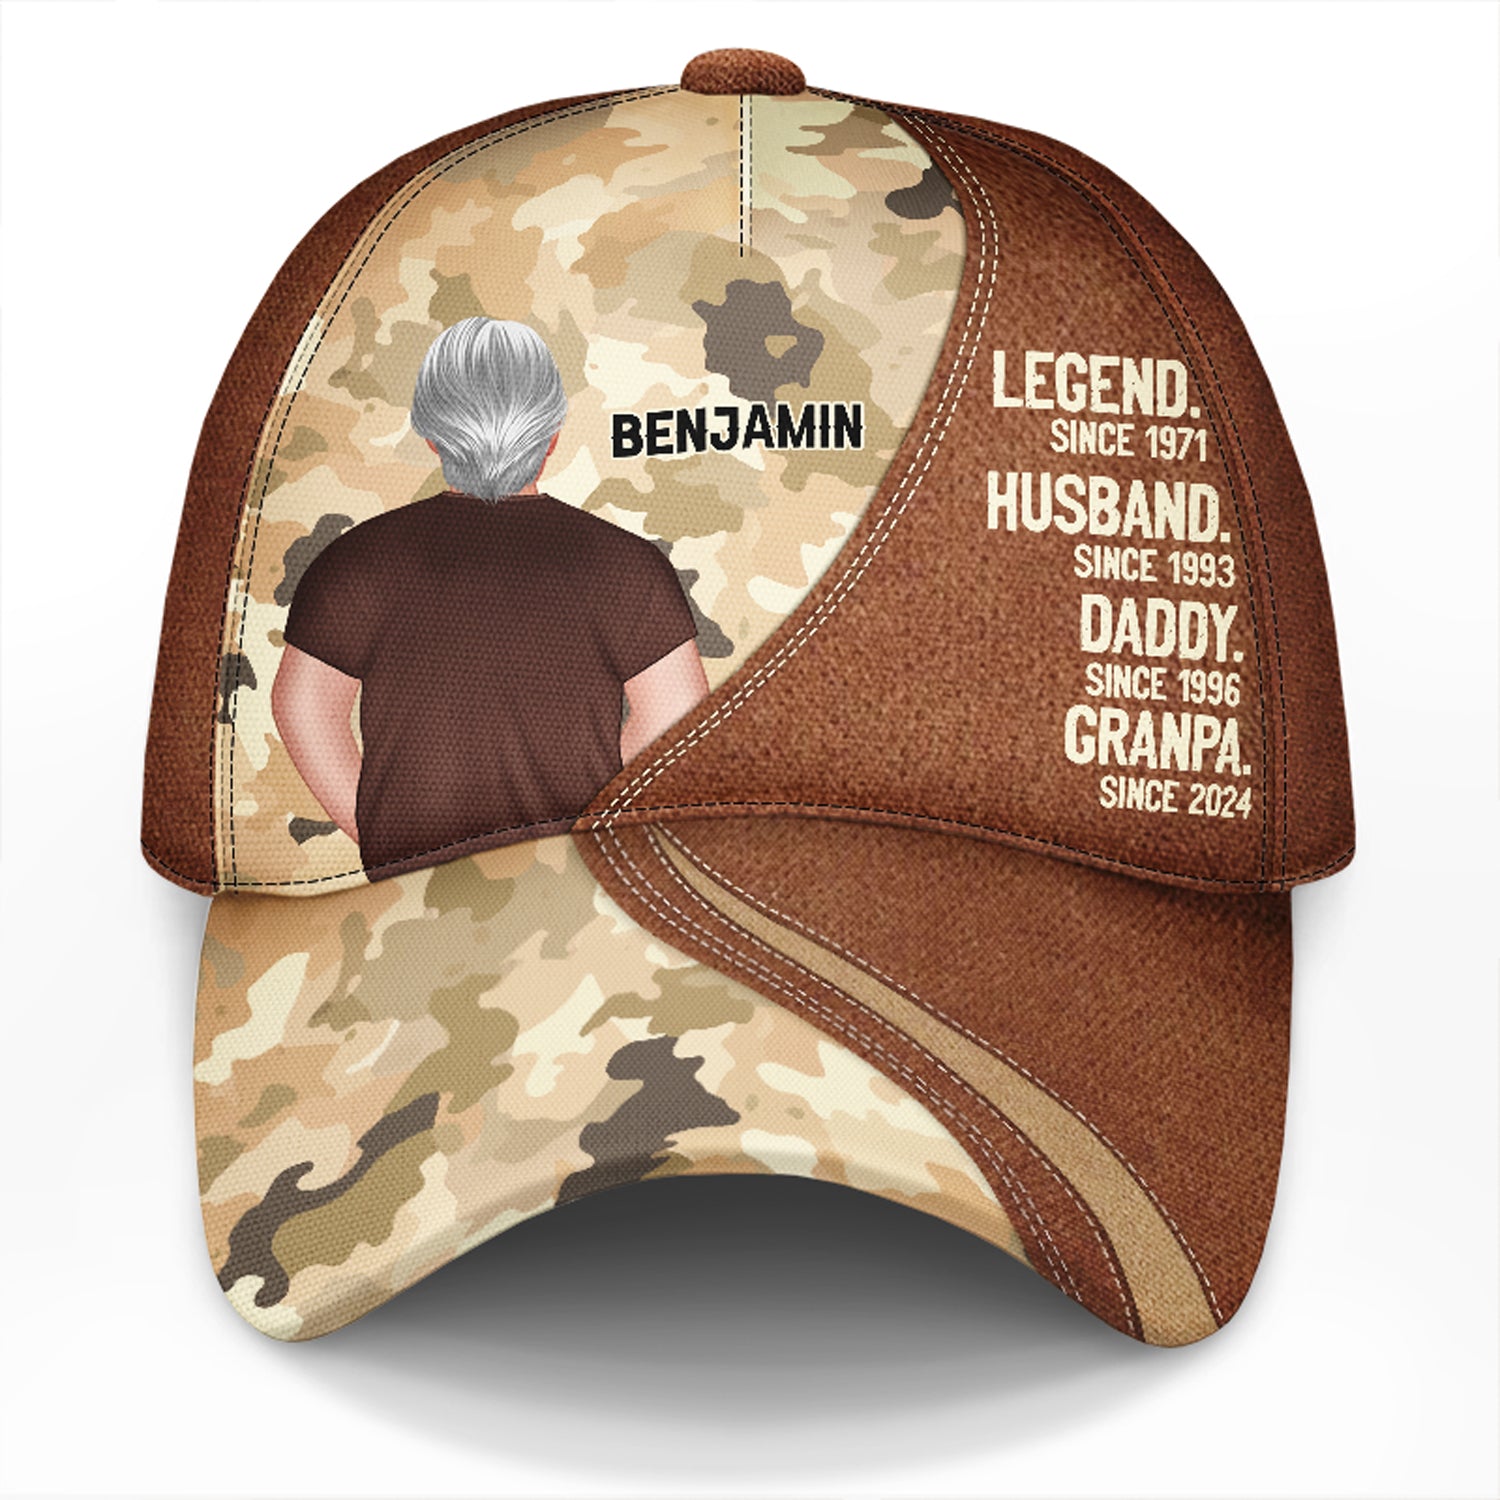 Legend Husband Daddy - Gift For Father, Dad - Personalized Classic Cap